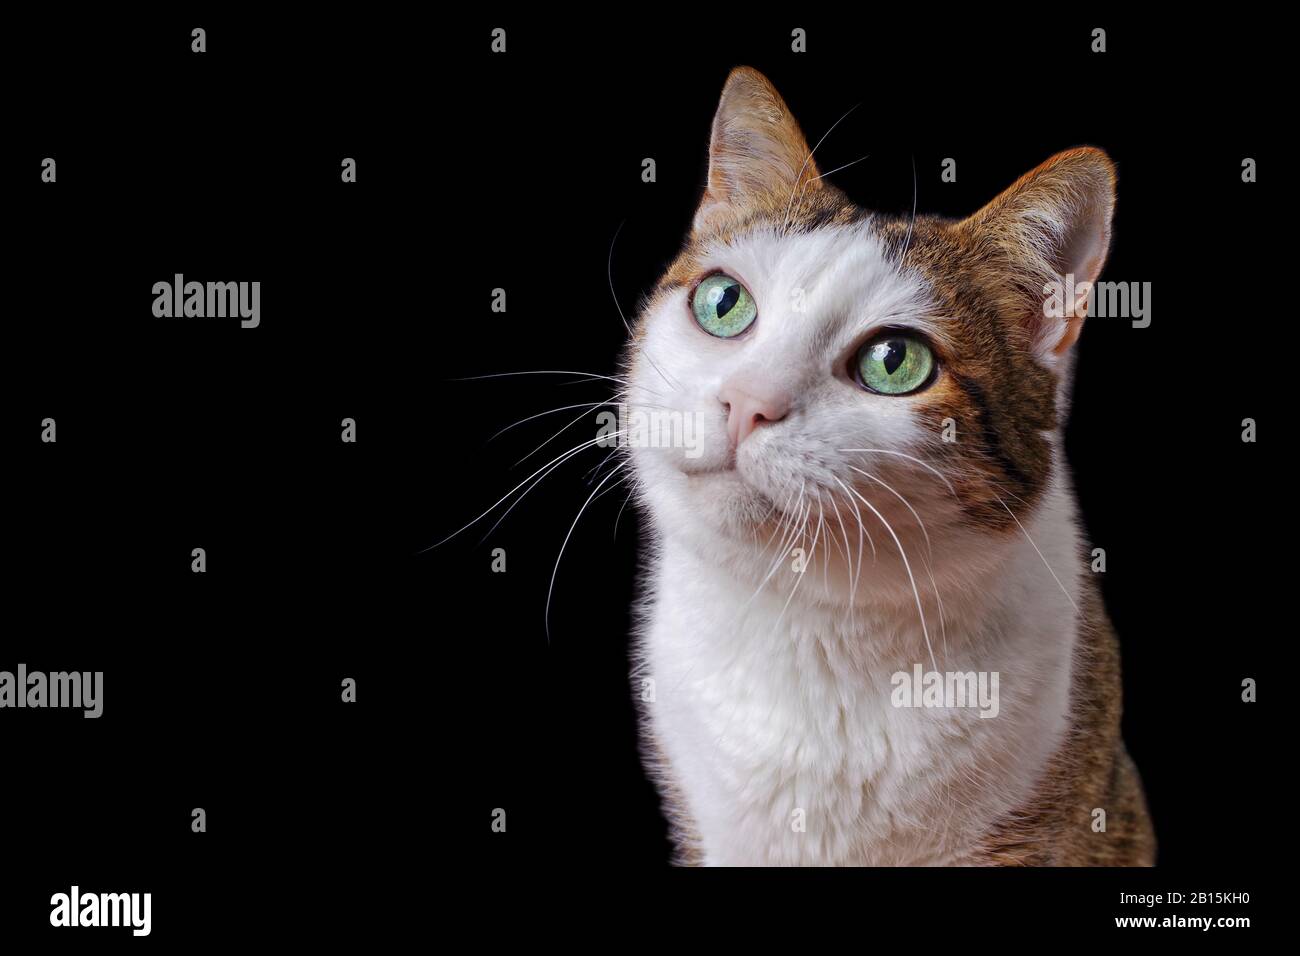 Cute tabby cat looking curious up. Horizontal image with copy space. Stock Photo